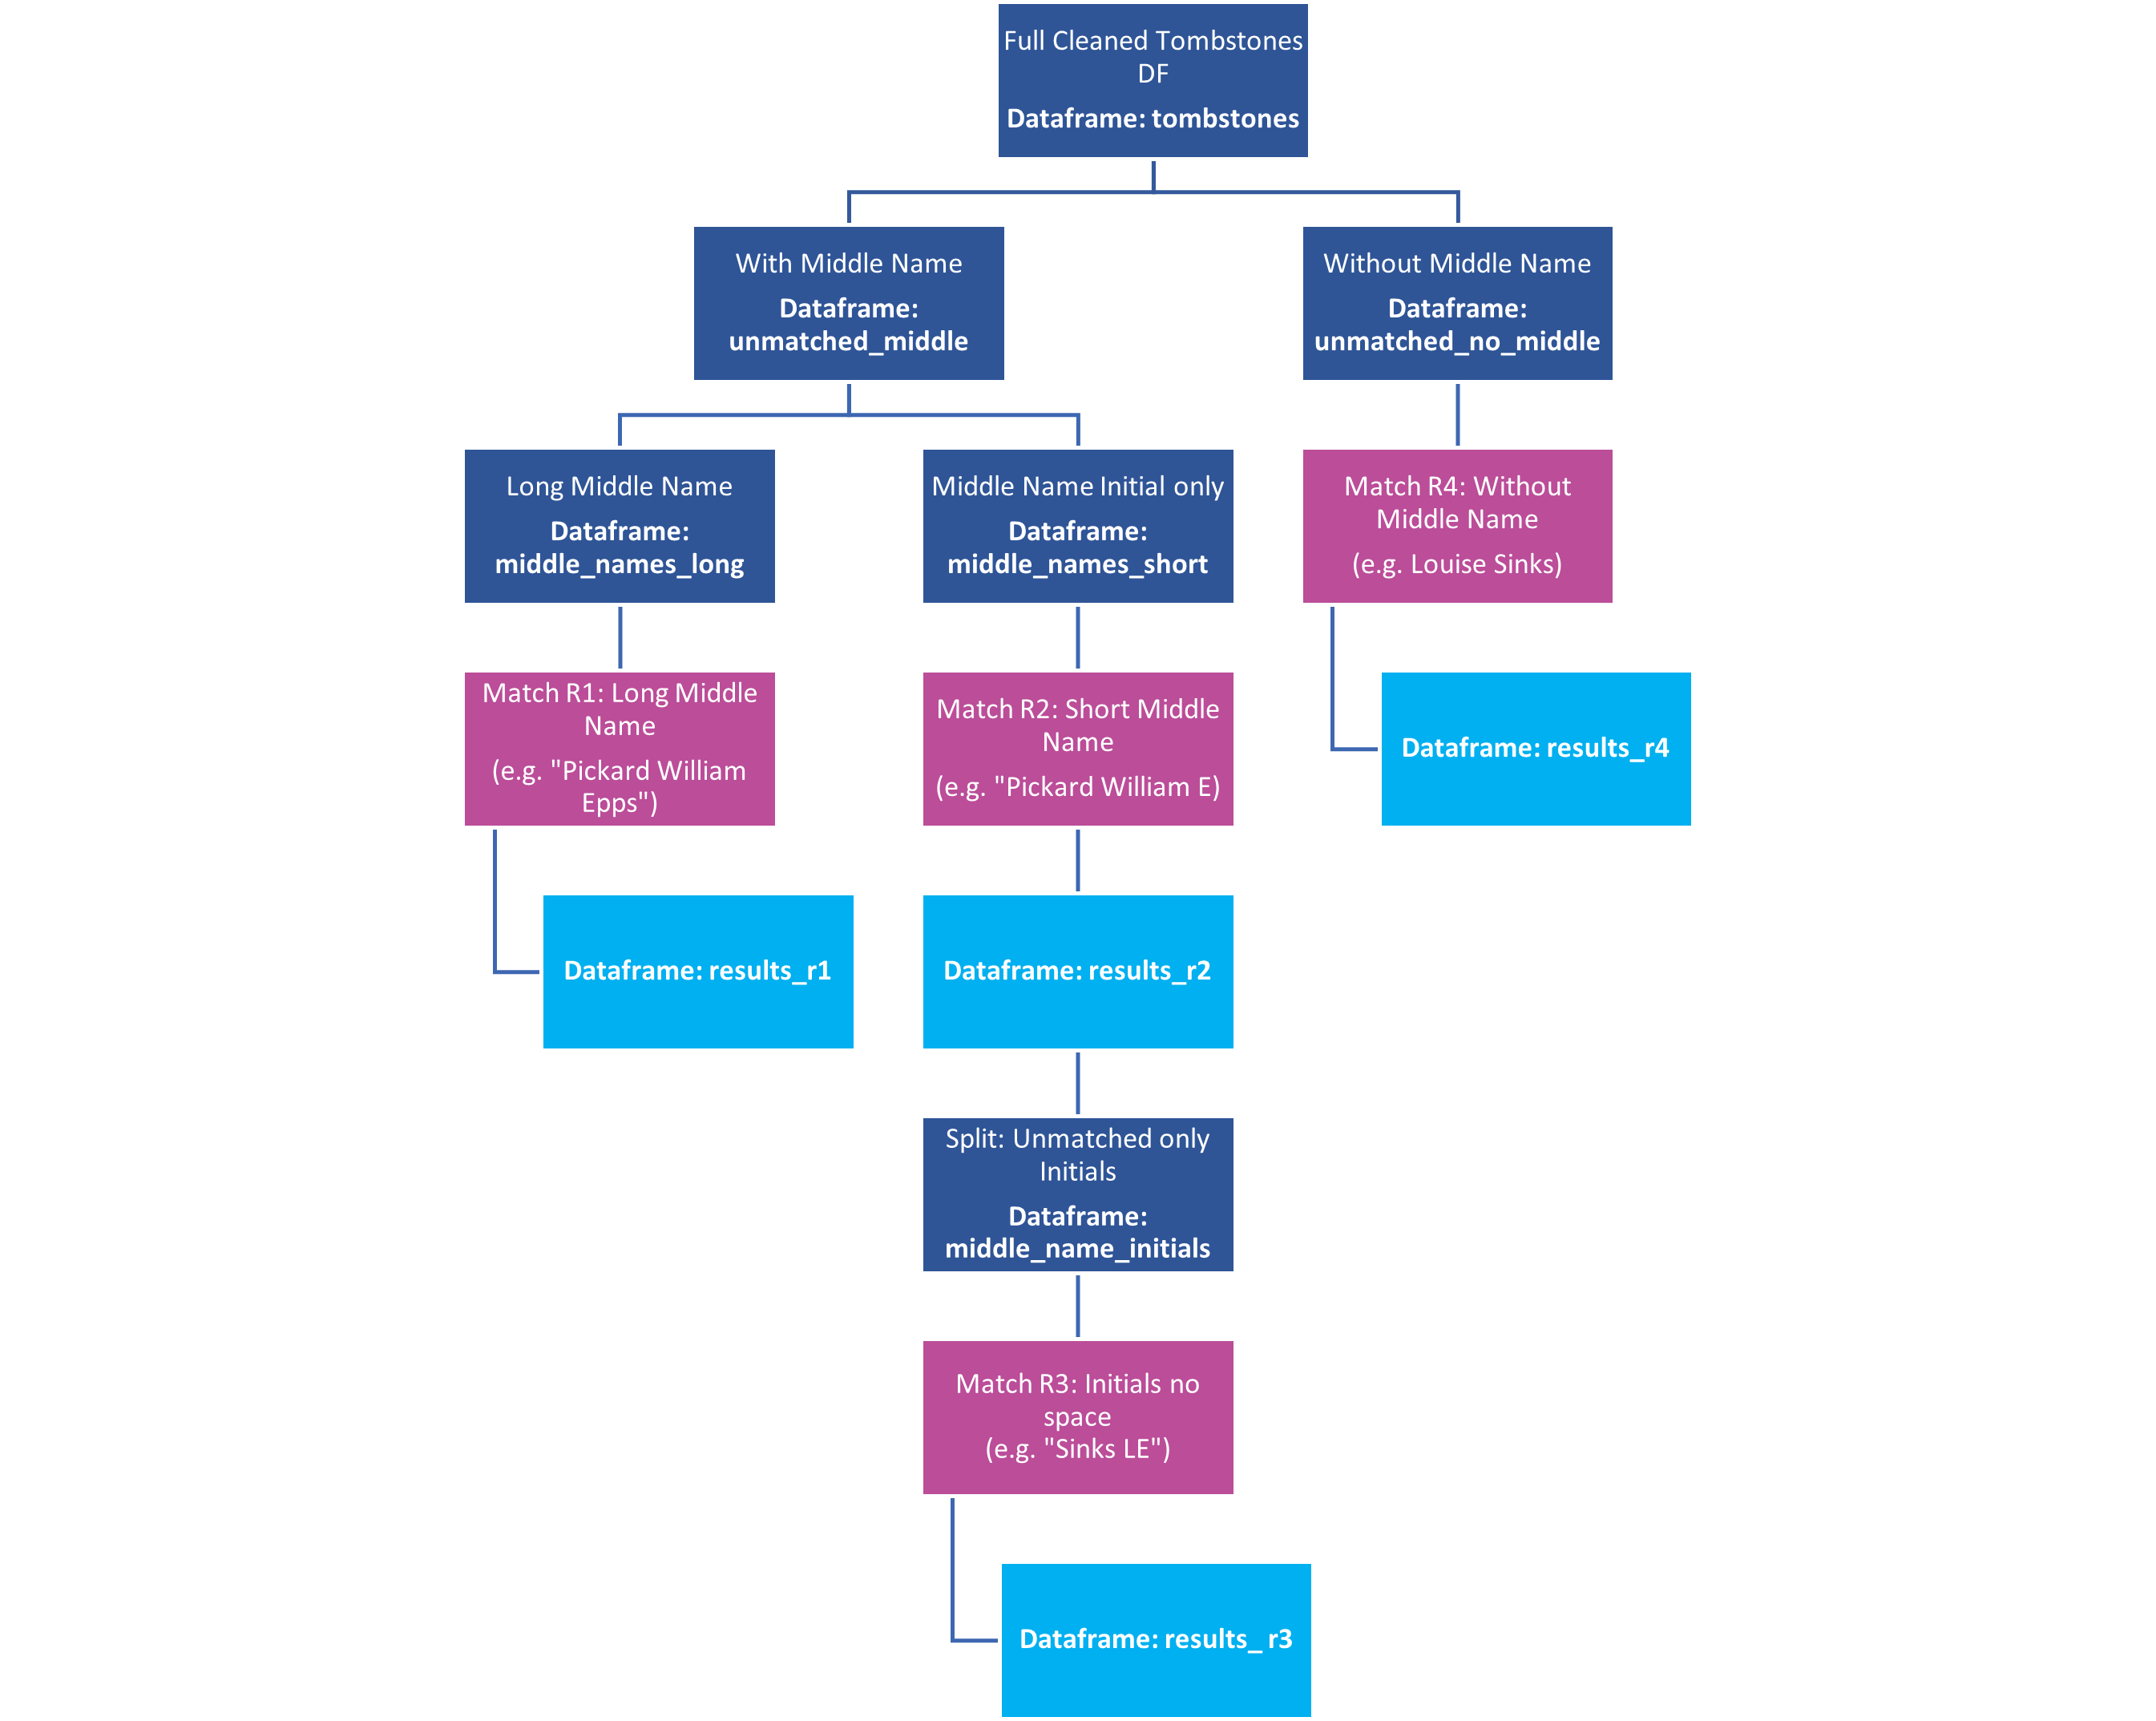 A flow chart illustrating the 4 match rounds, the dataframes, and how they inter-relate